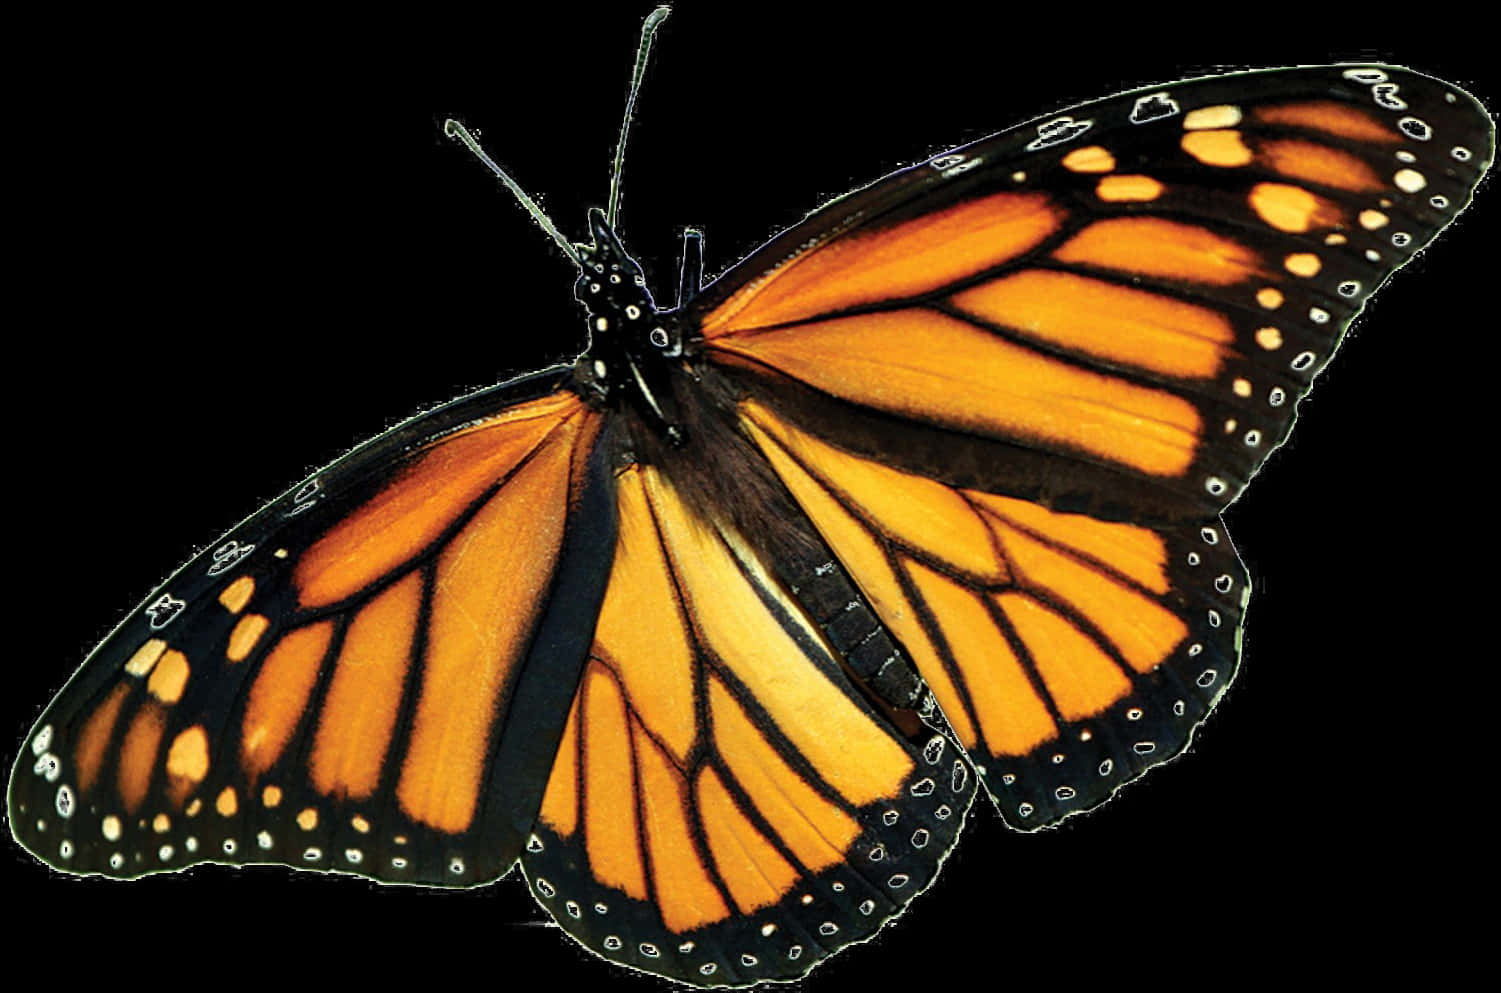 Monarch Butterfly Transparent Background